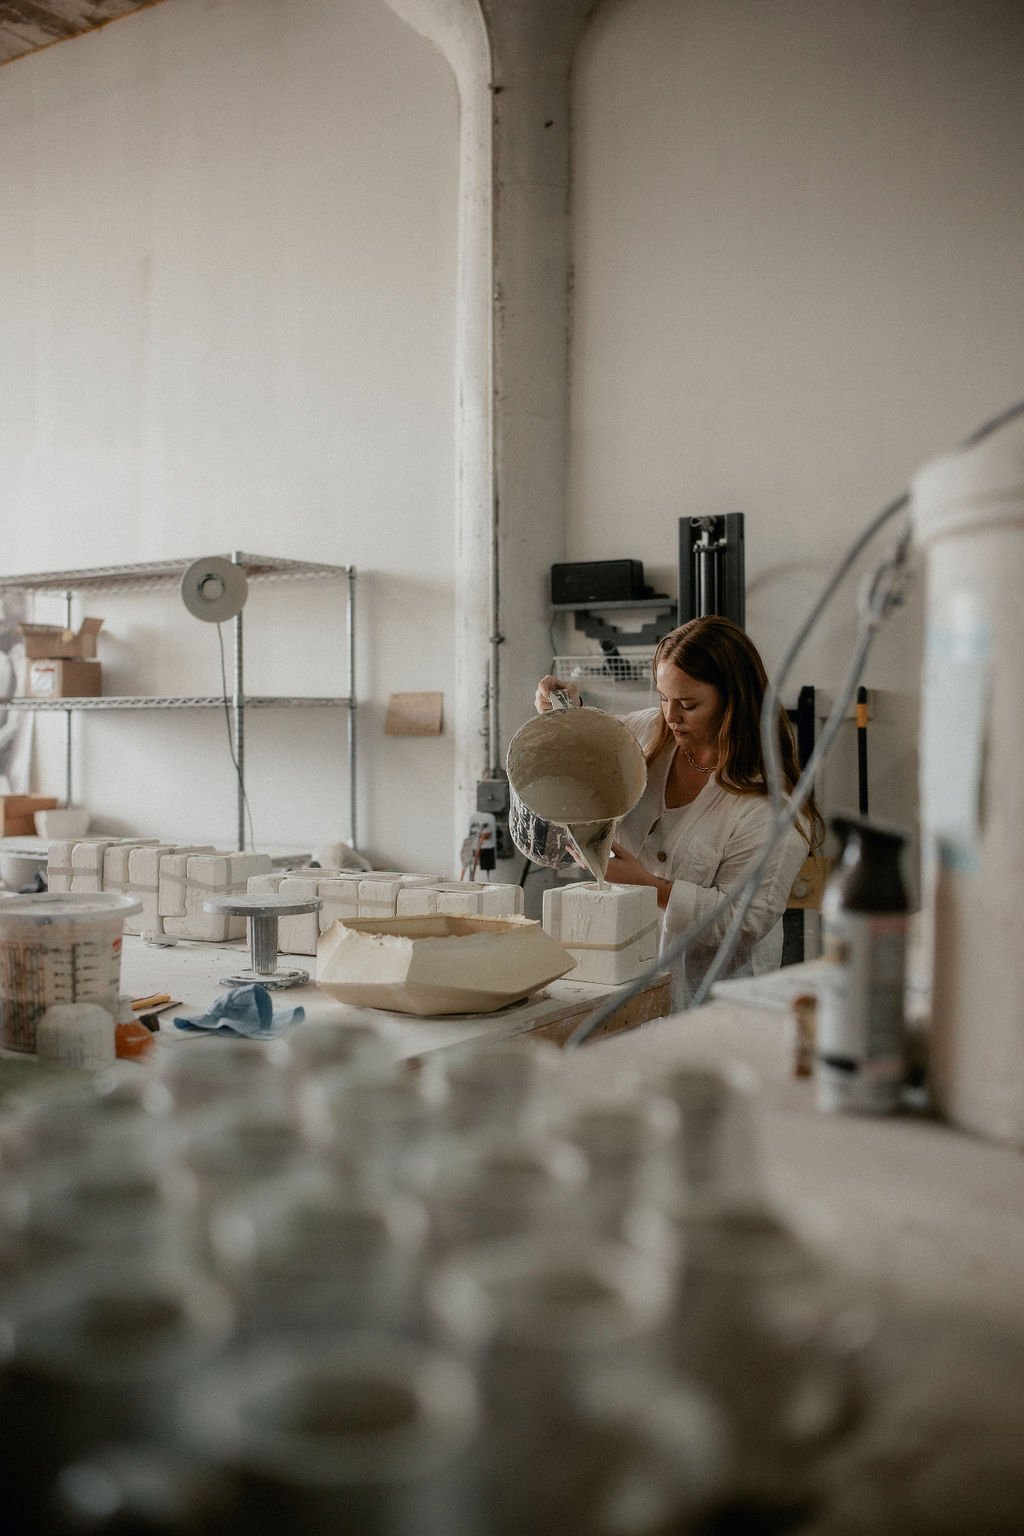  An image of Lauren HB Studio production artist pouring ceramics into a mold 